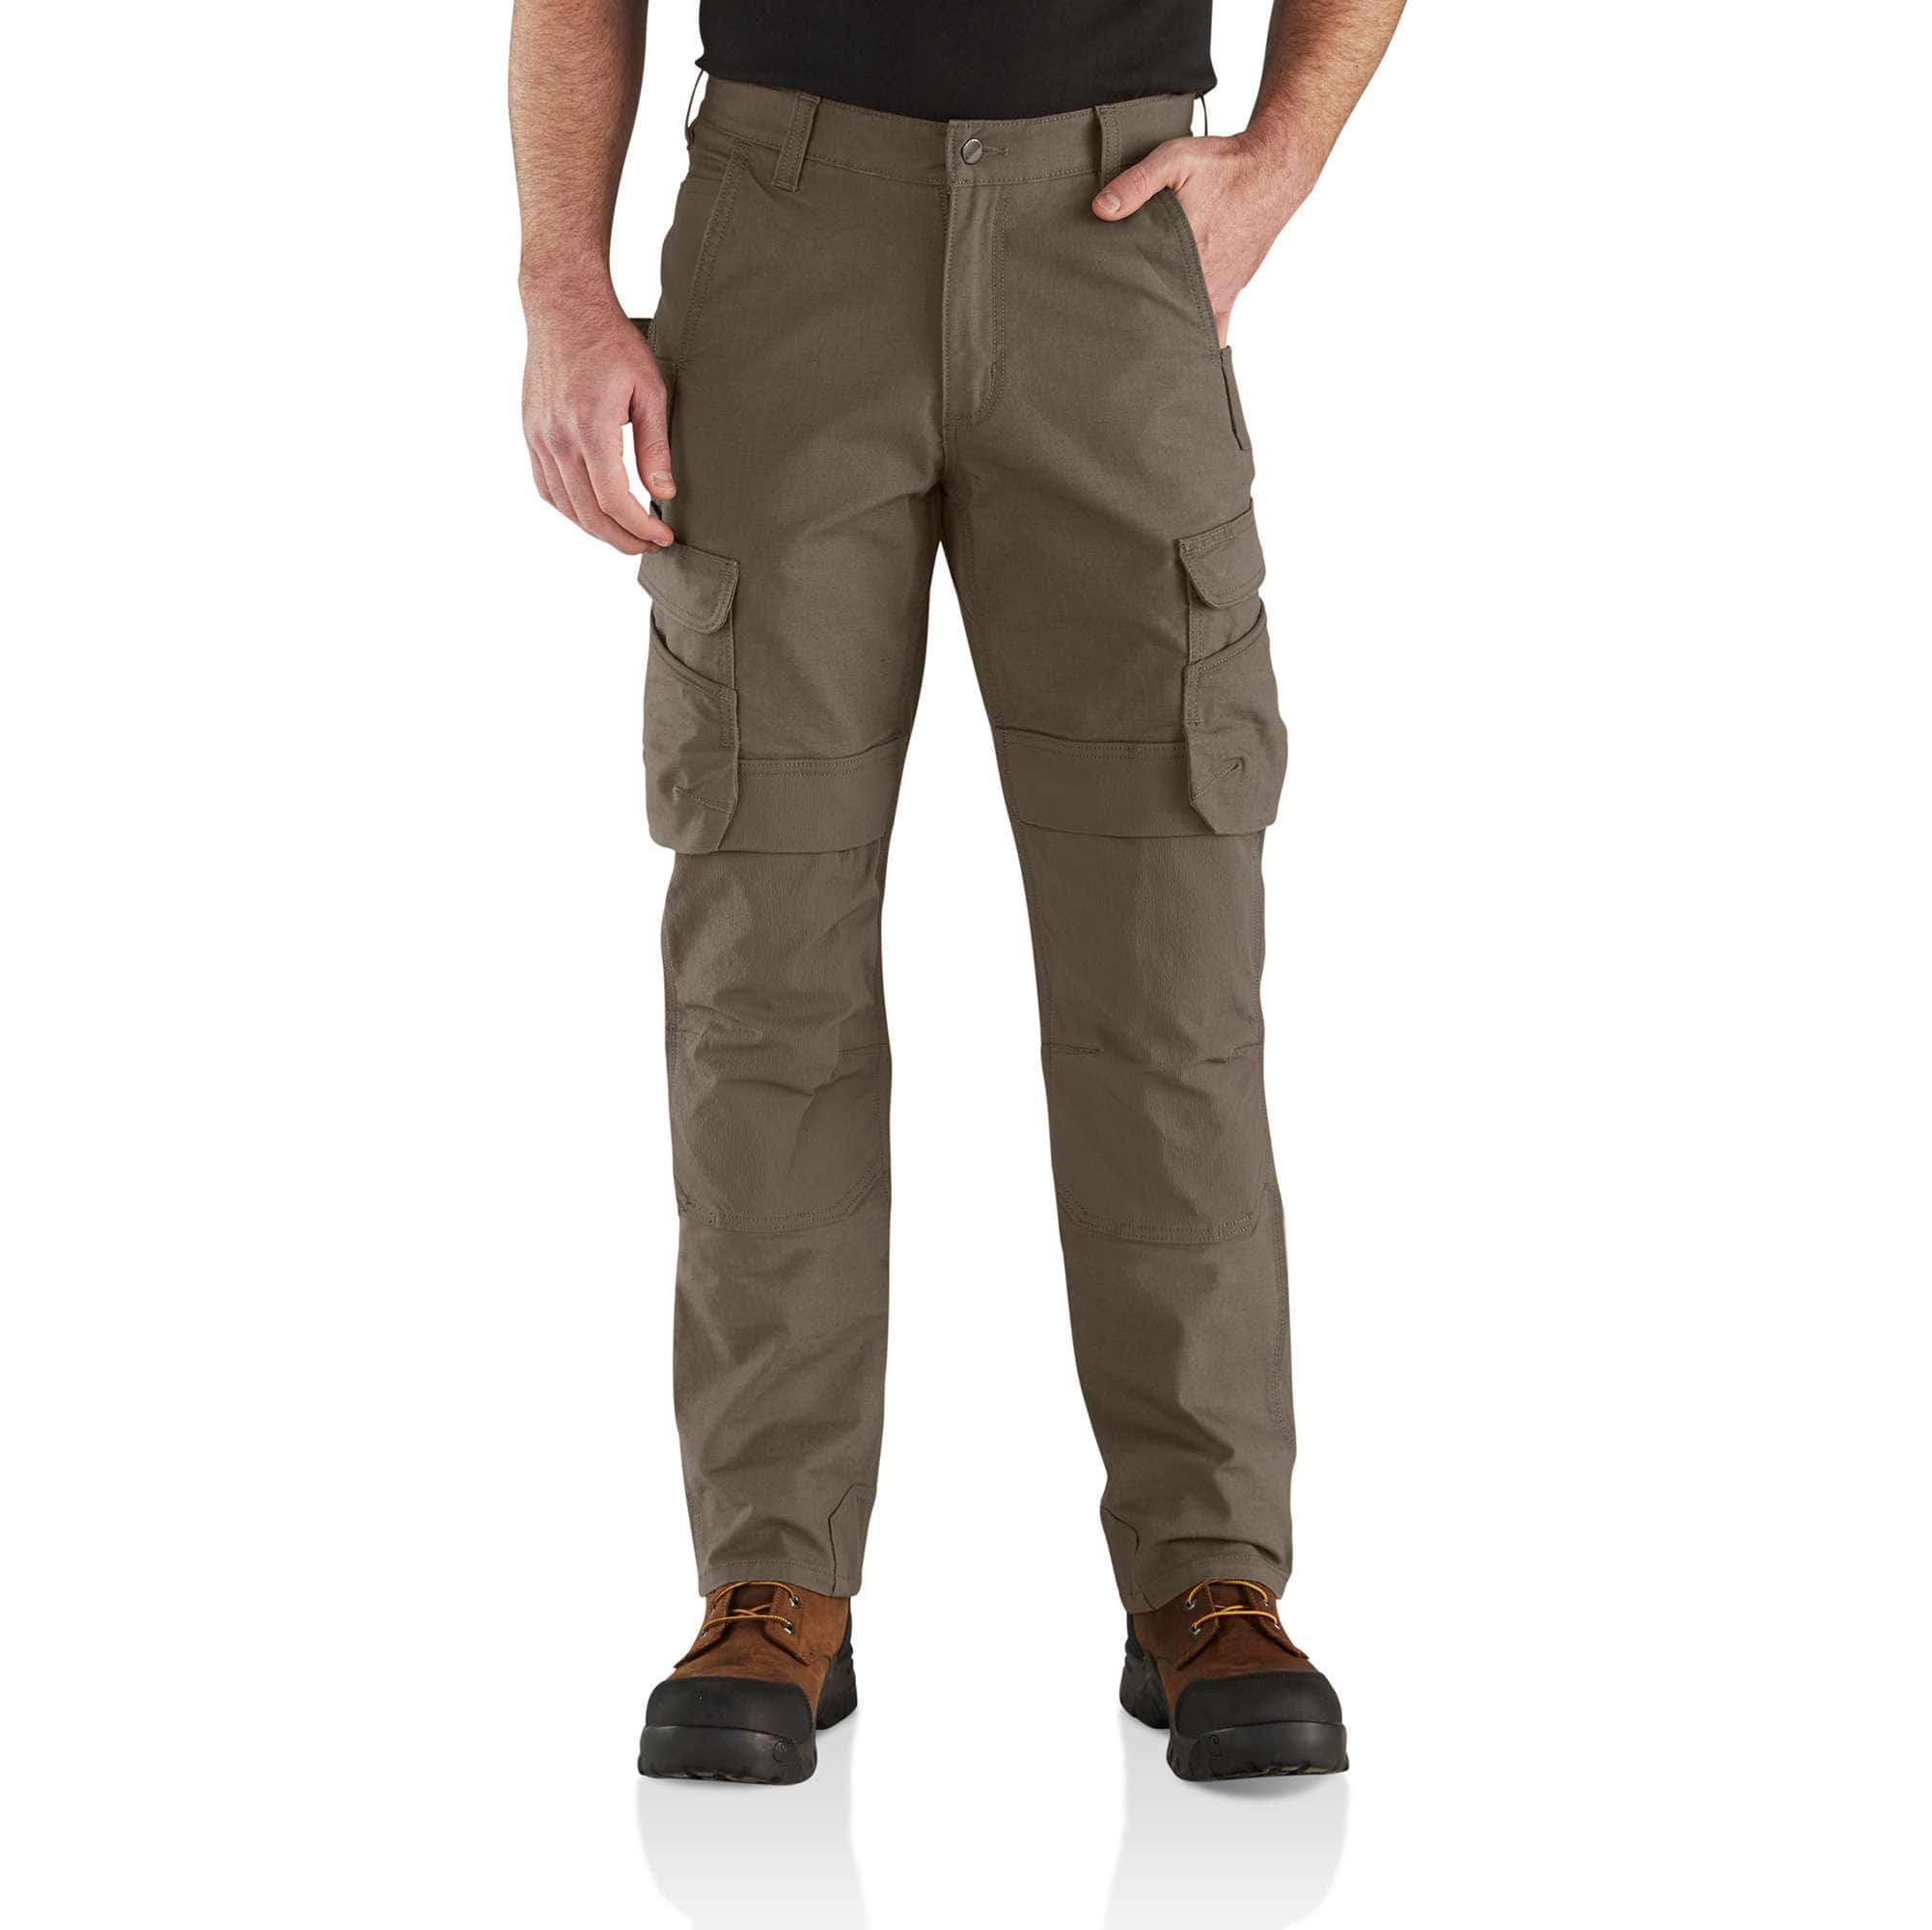 Boys' Lined Cargo Pants - All in Motion Charcoal XL